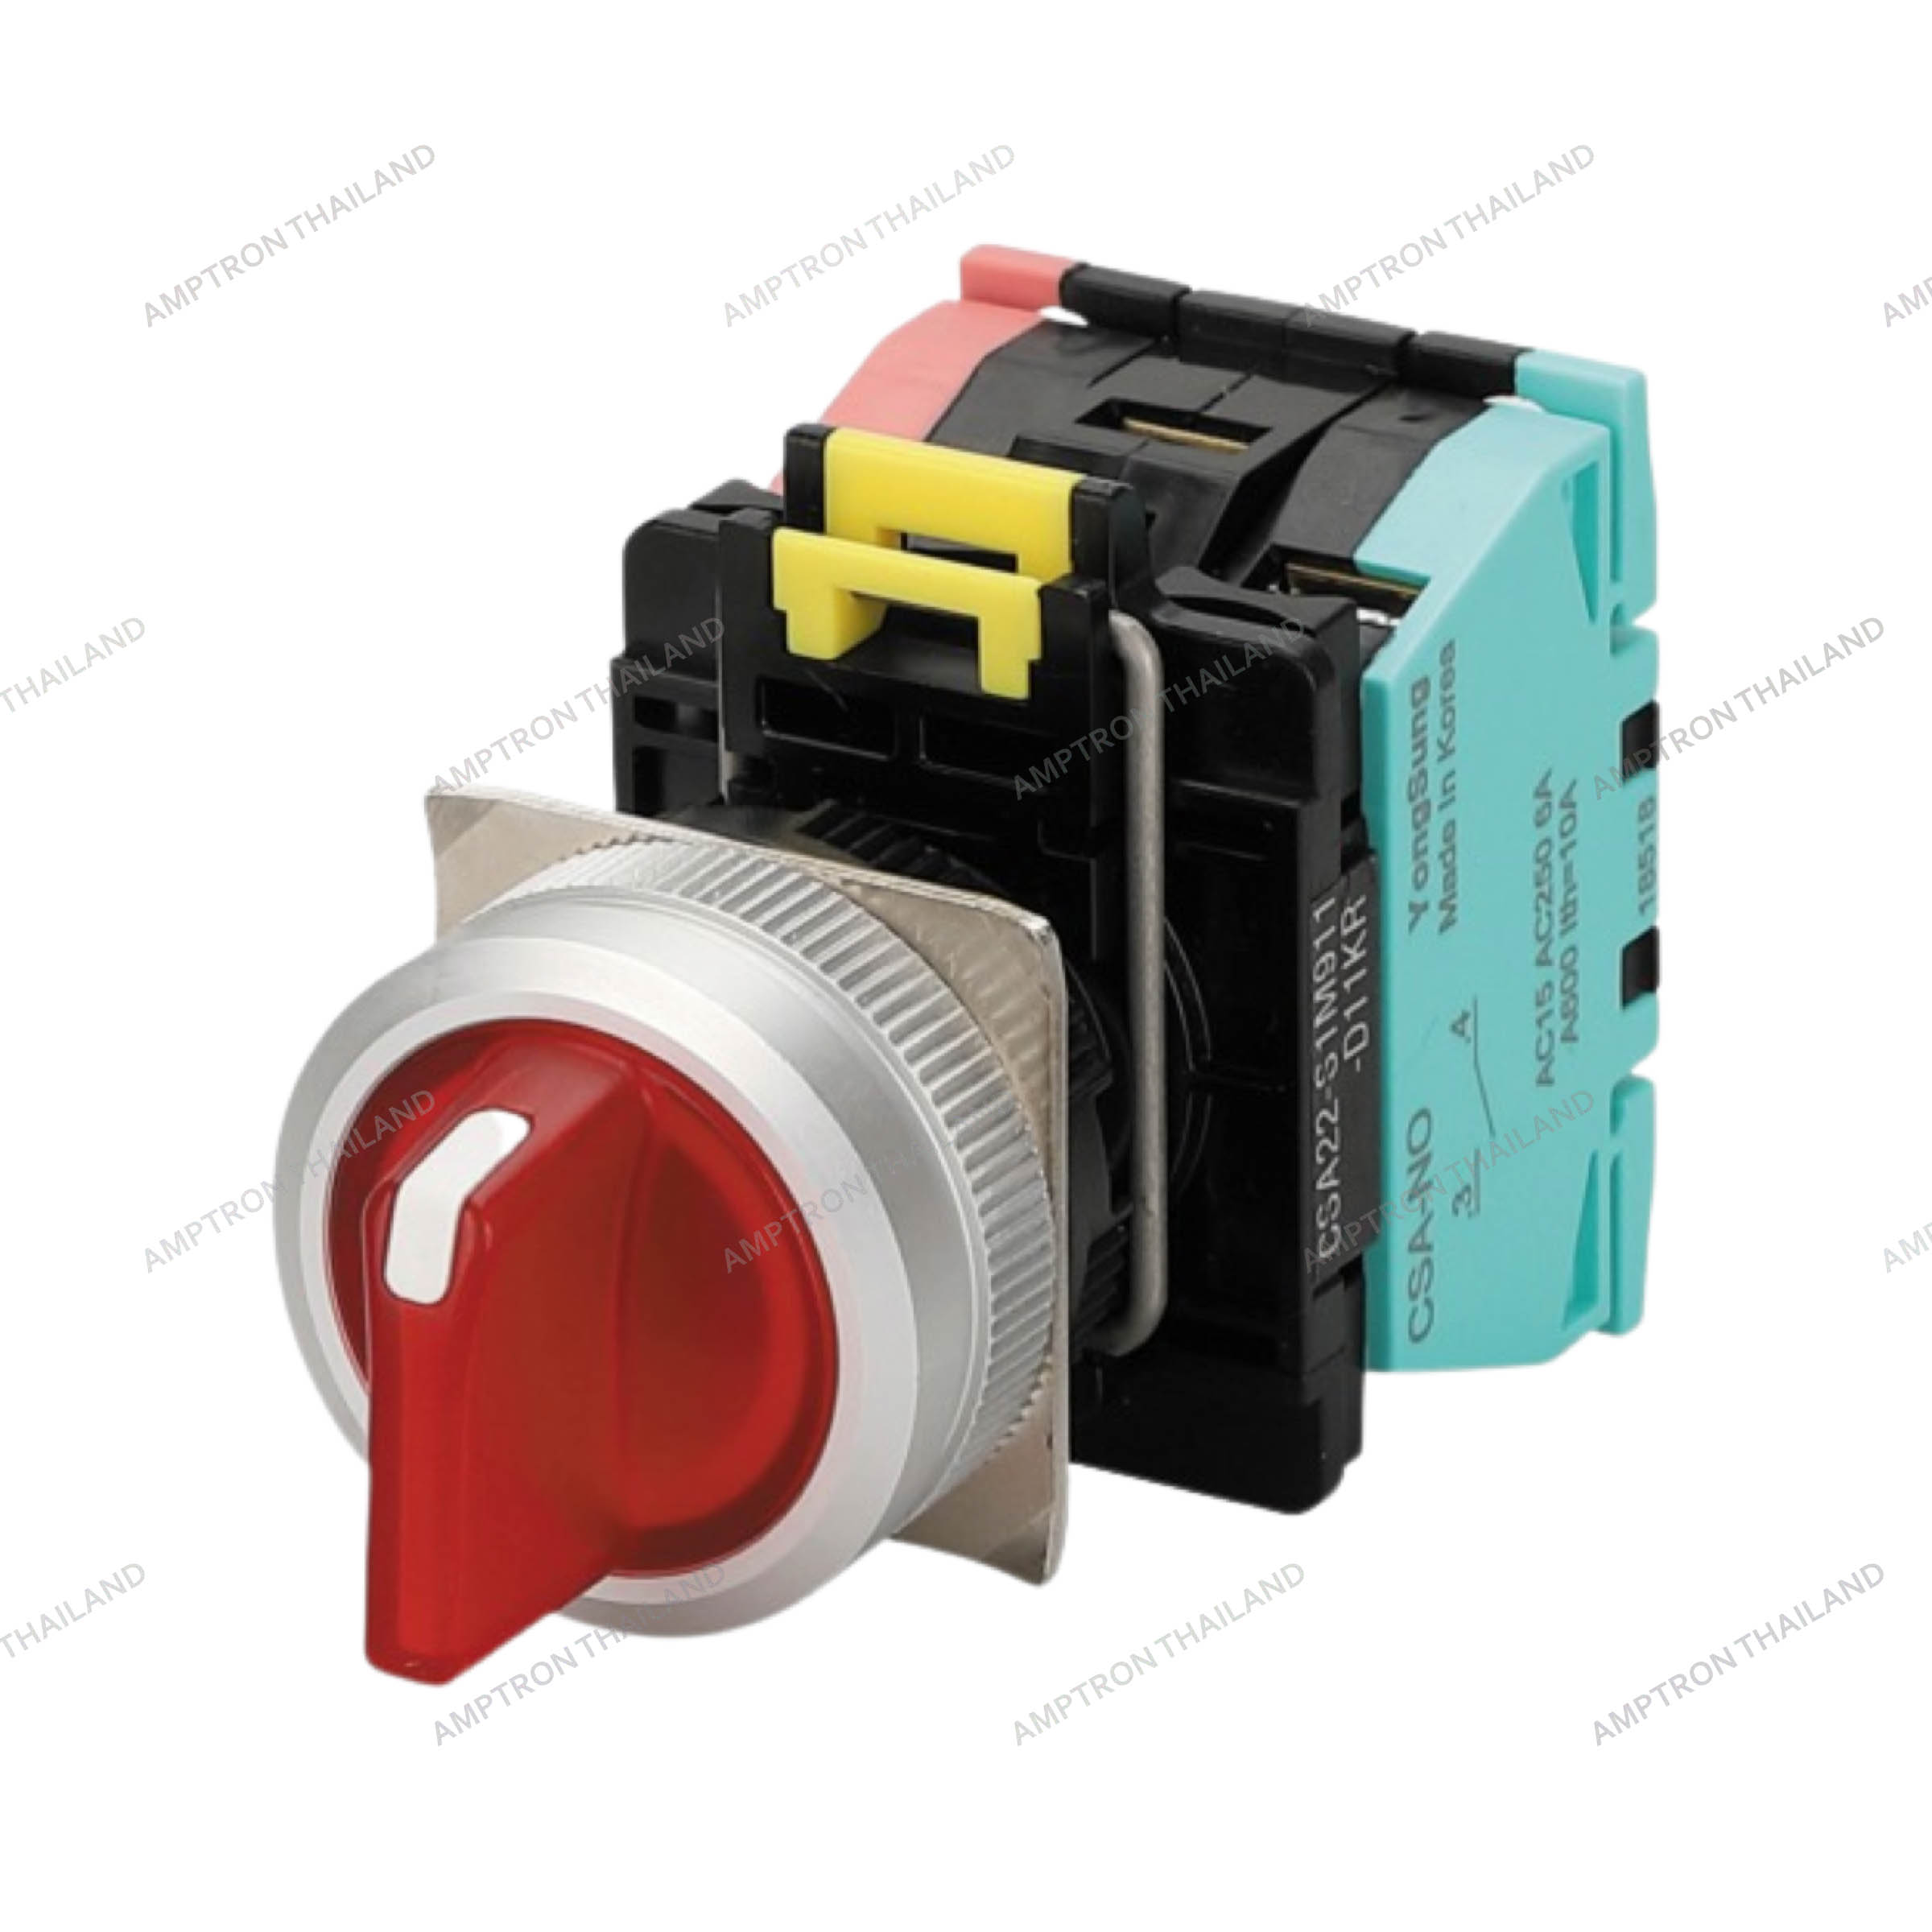 Selector Switch (Lamp Type, General Type, Key Switch)